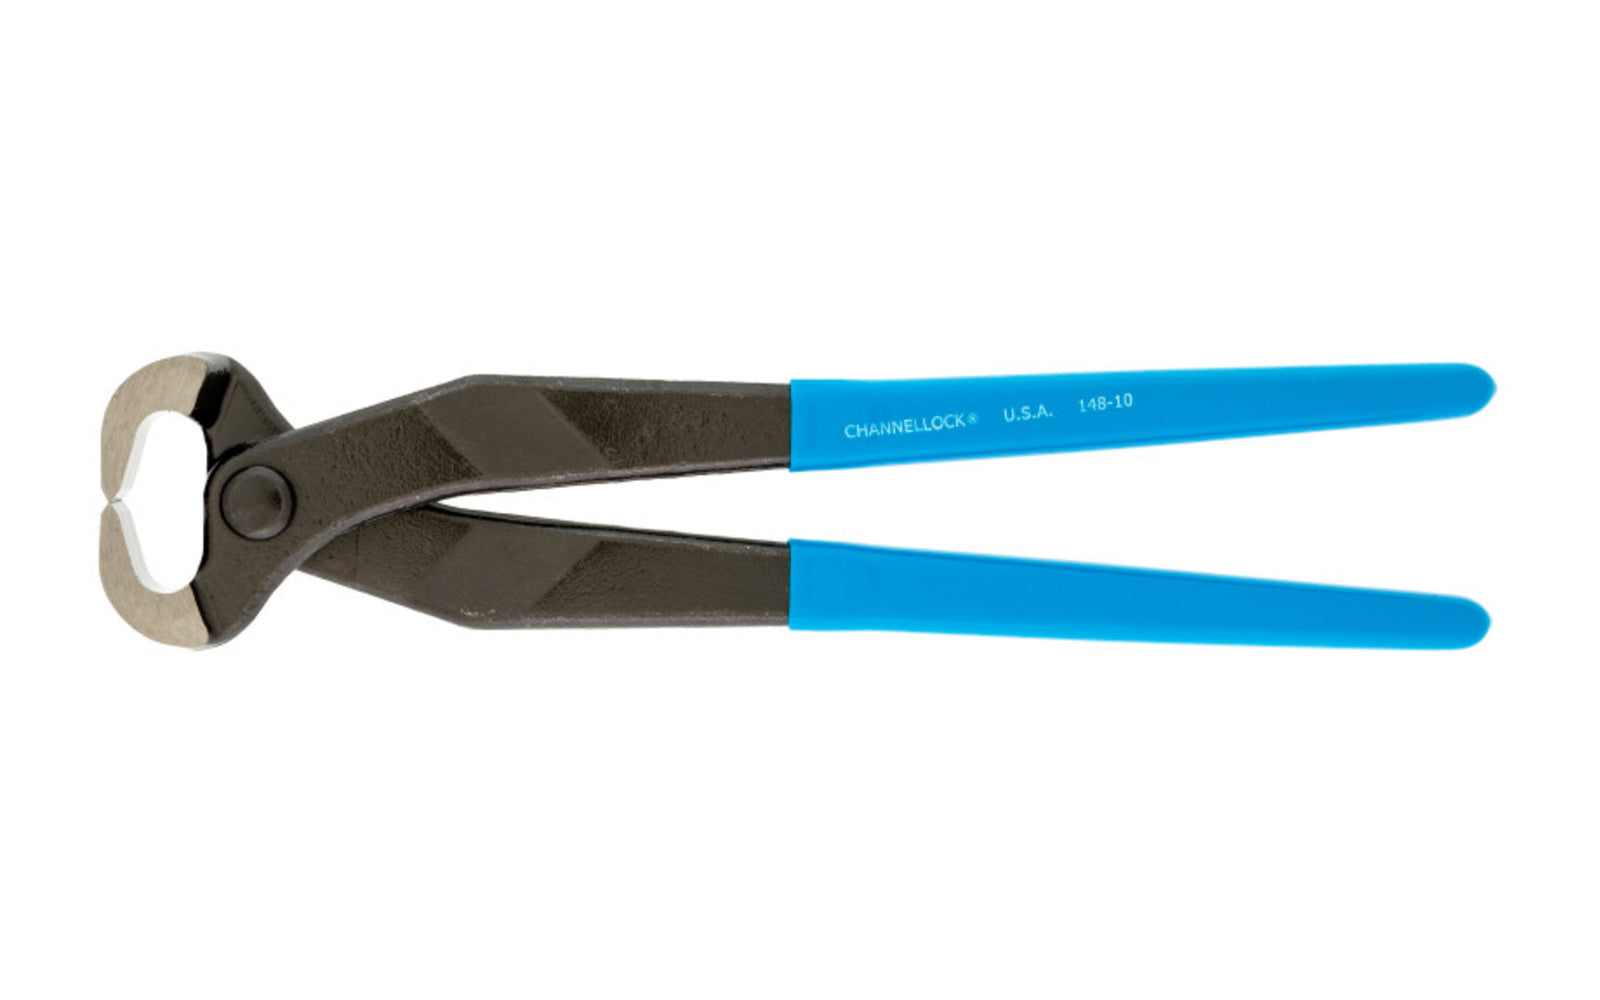 These 10" Channellock End Cutting Pliers are ideal for cutting large nails. It is recommended for medium hard and copper applications only. Cutting capabilities include medium hard wire (0.047" - 0.091") and soft wire (0.162" max diameter). Channelock Model 148-10. Made in USA.